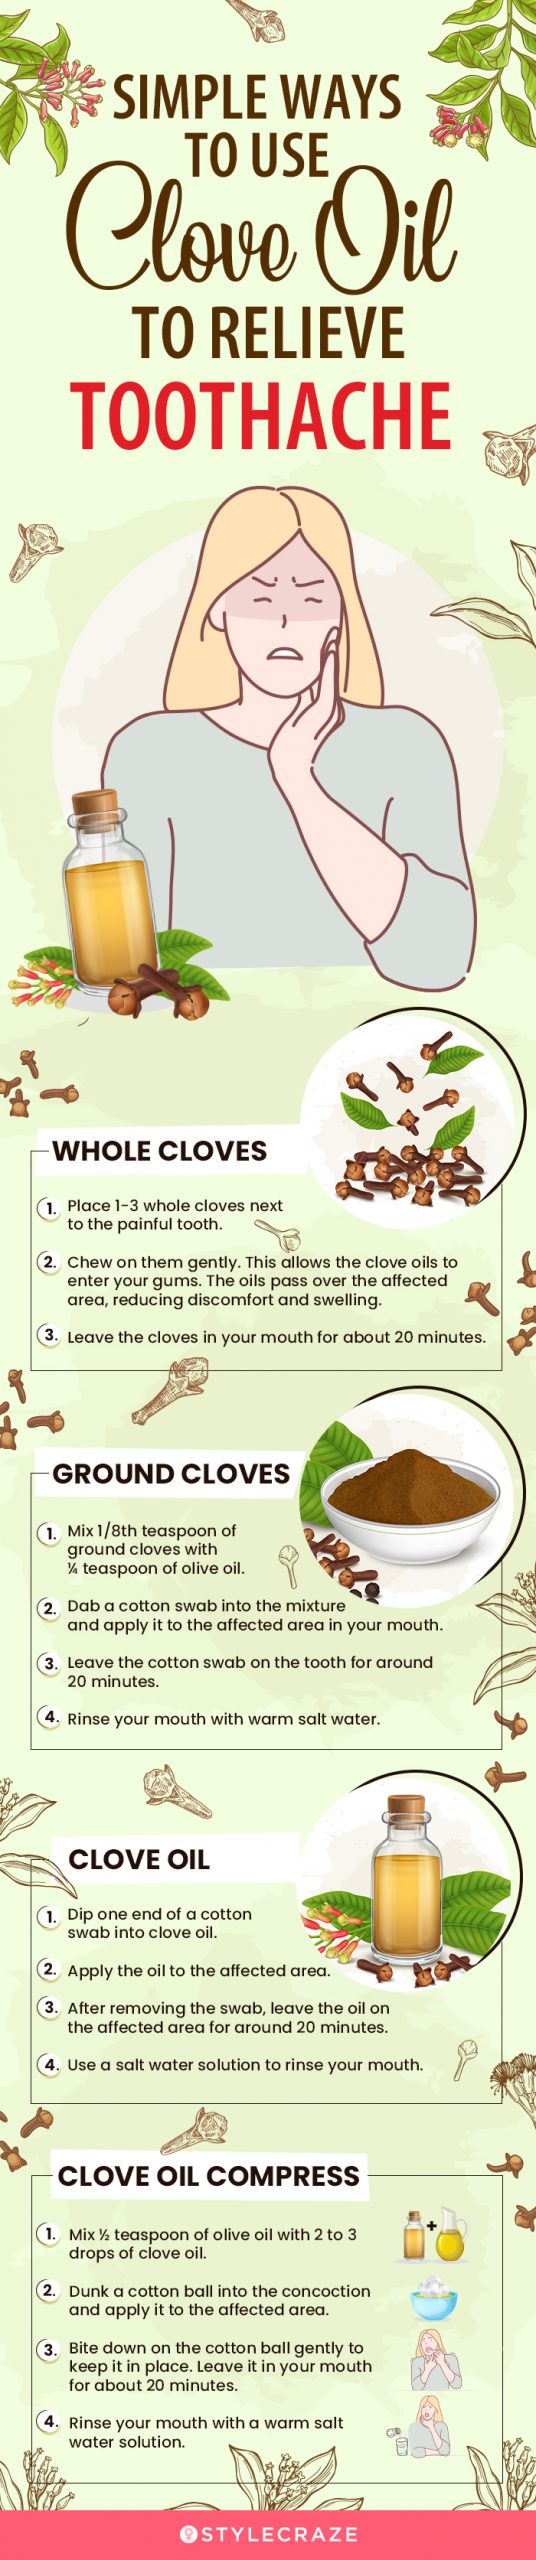 simple ways to use clove oil to relieve toothache (infographic)